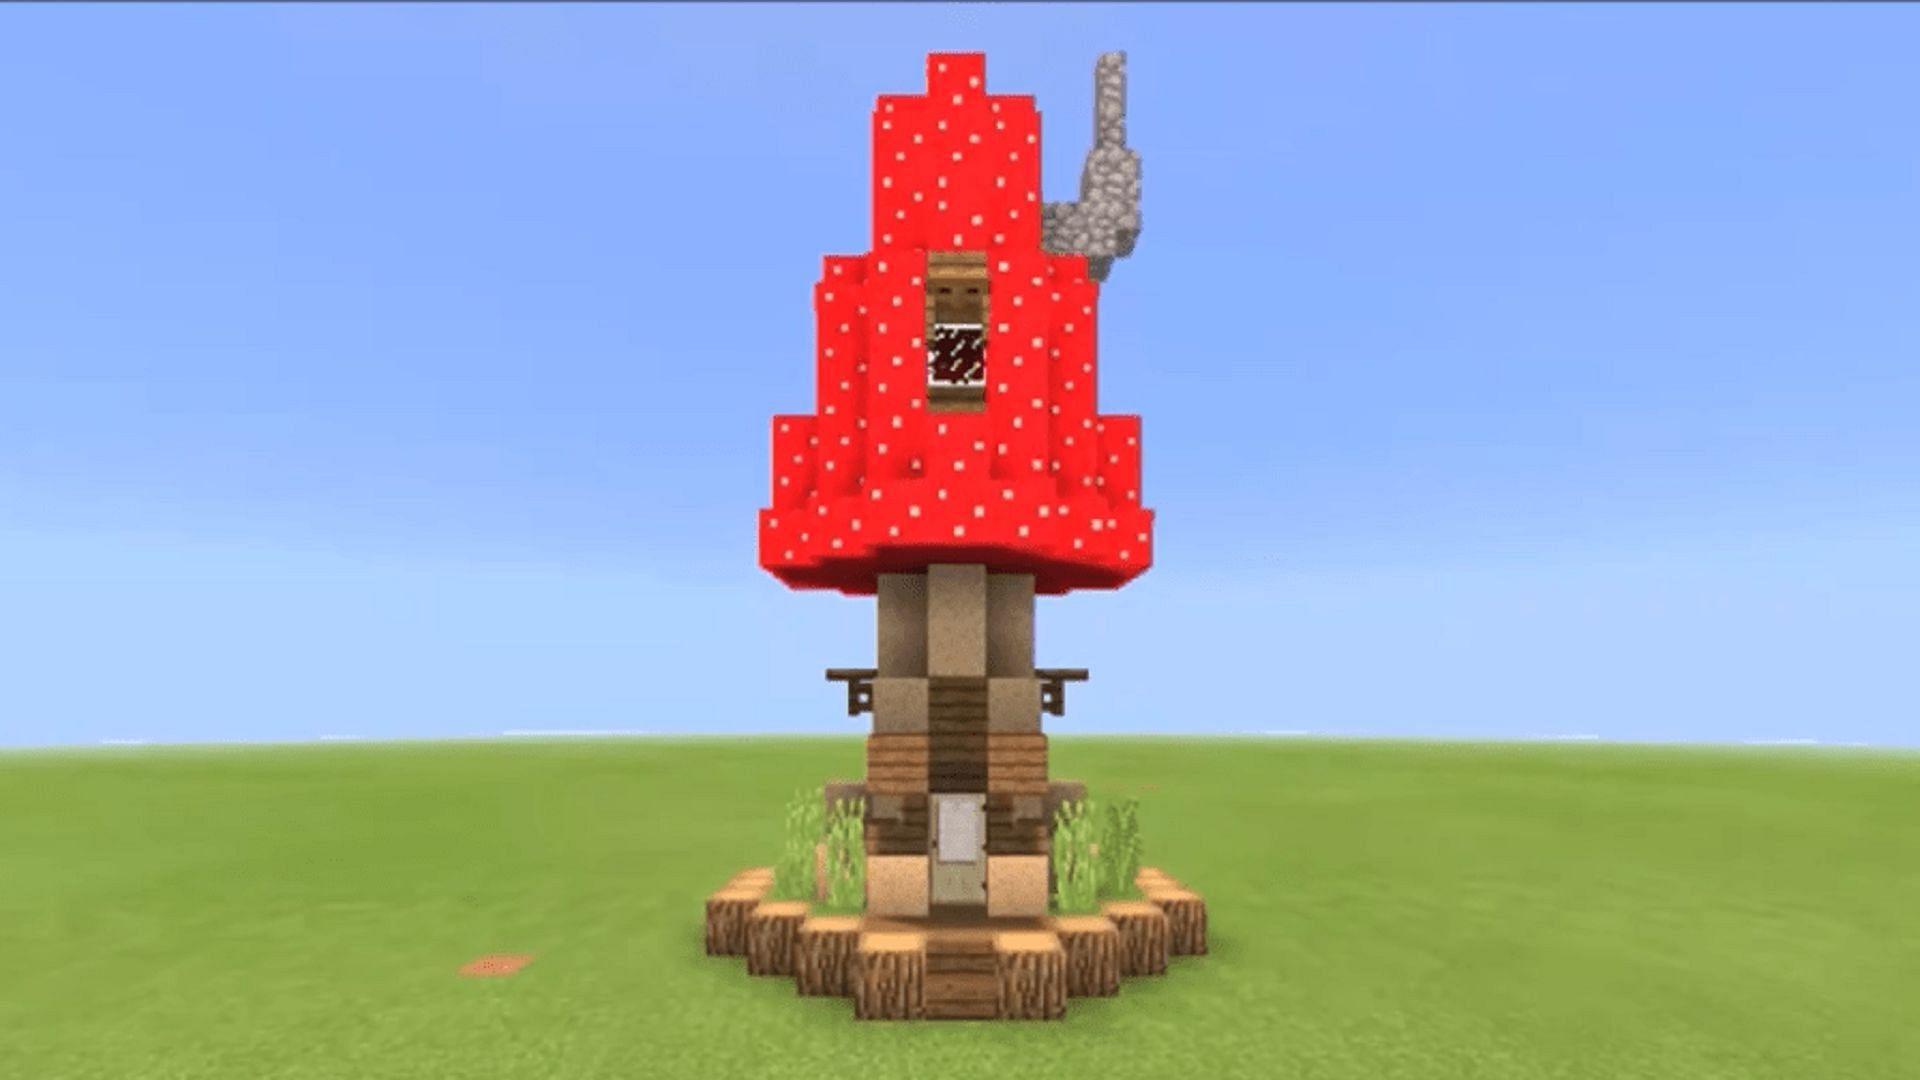 A mushroom house makes for a particularly quirky build (Image via DaphneElaine/YouTube)